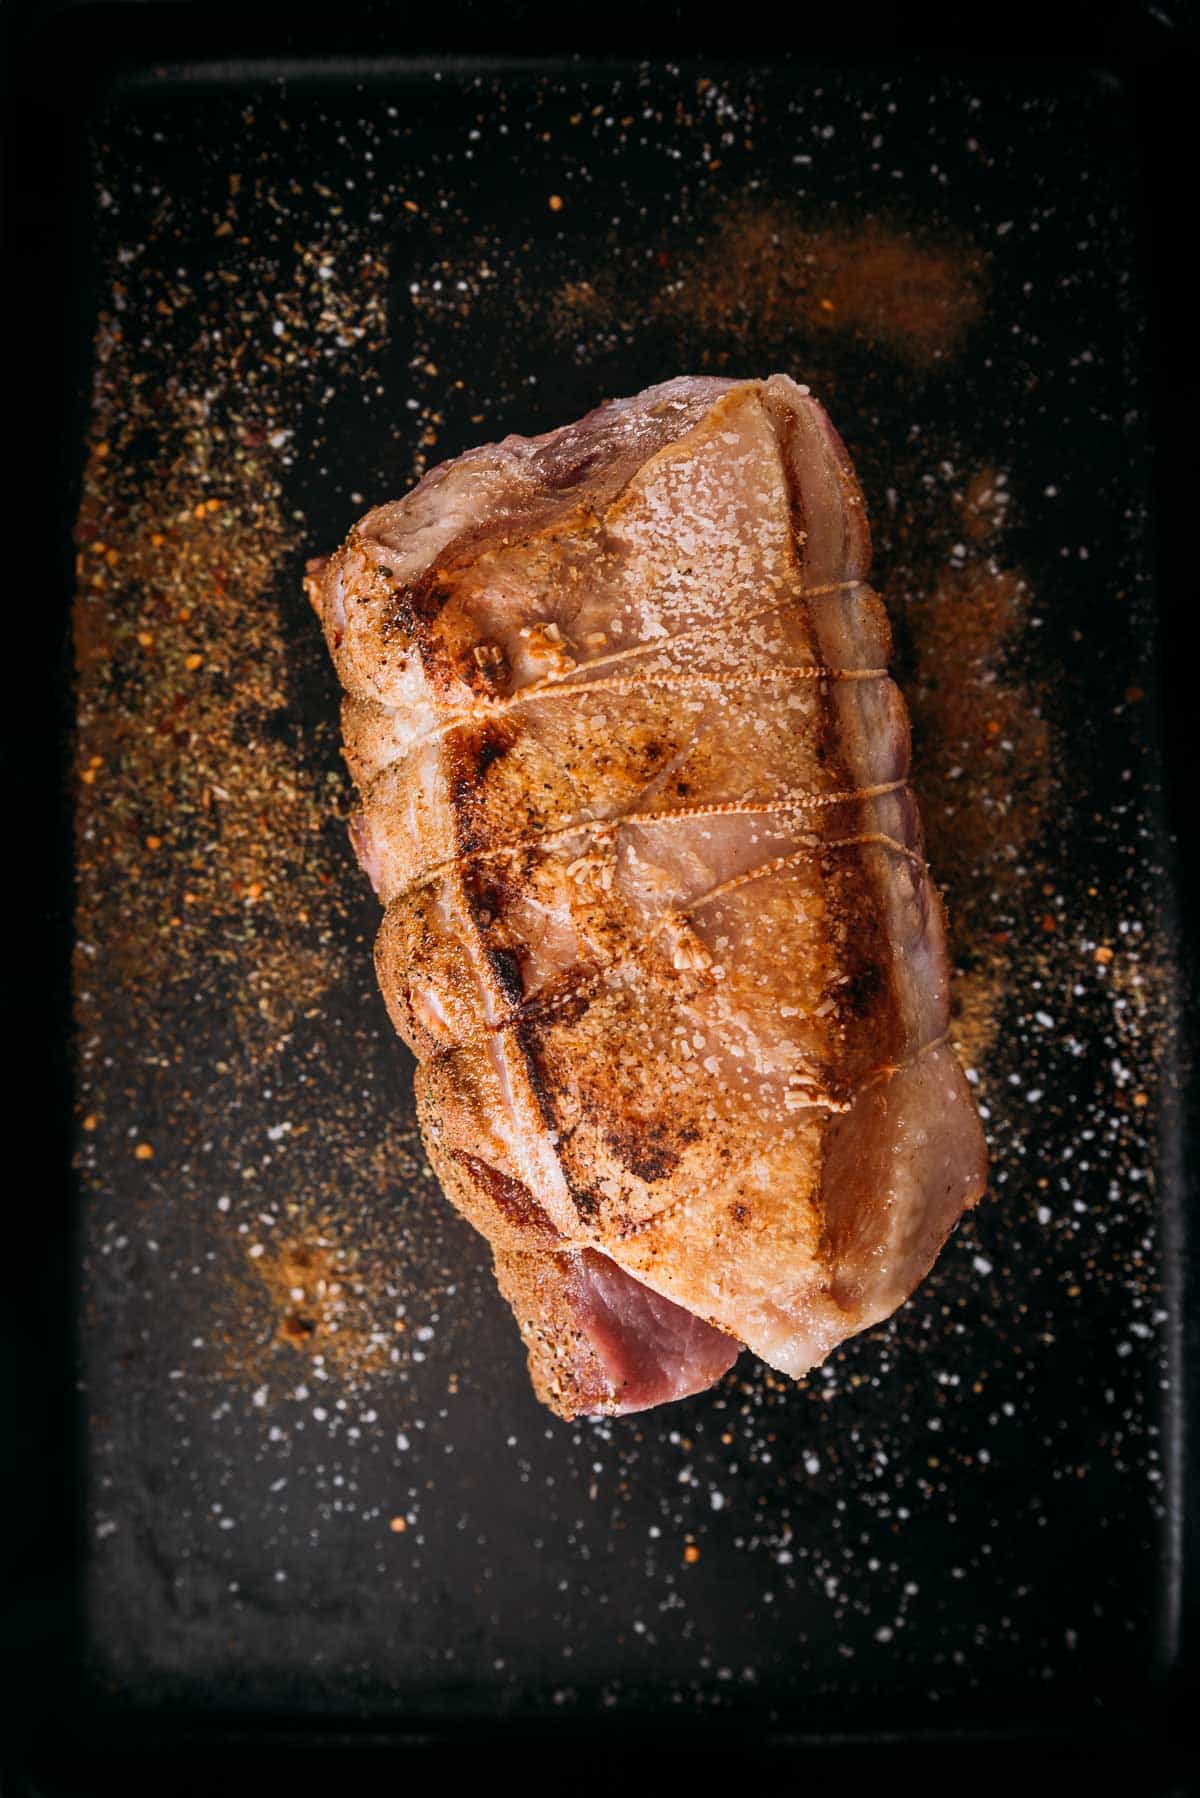 Seared pork fat cap with seasoning on a black tray, viewed from above.